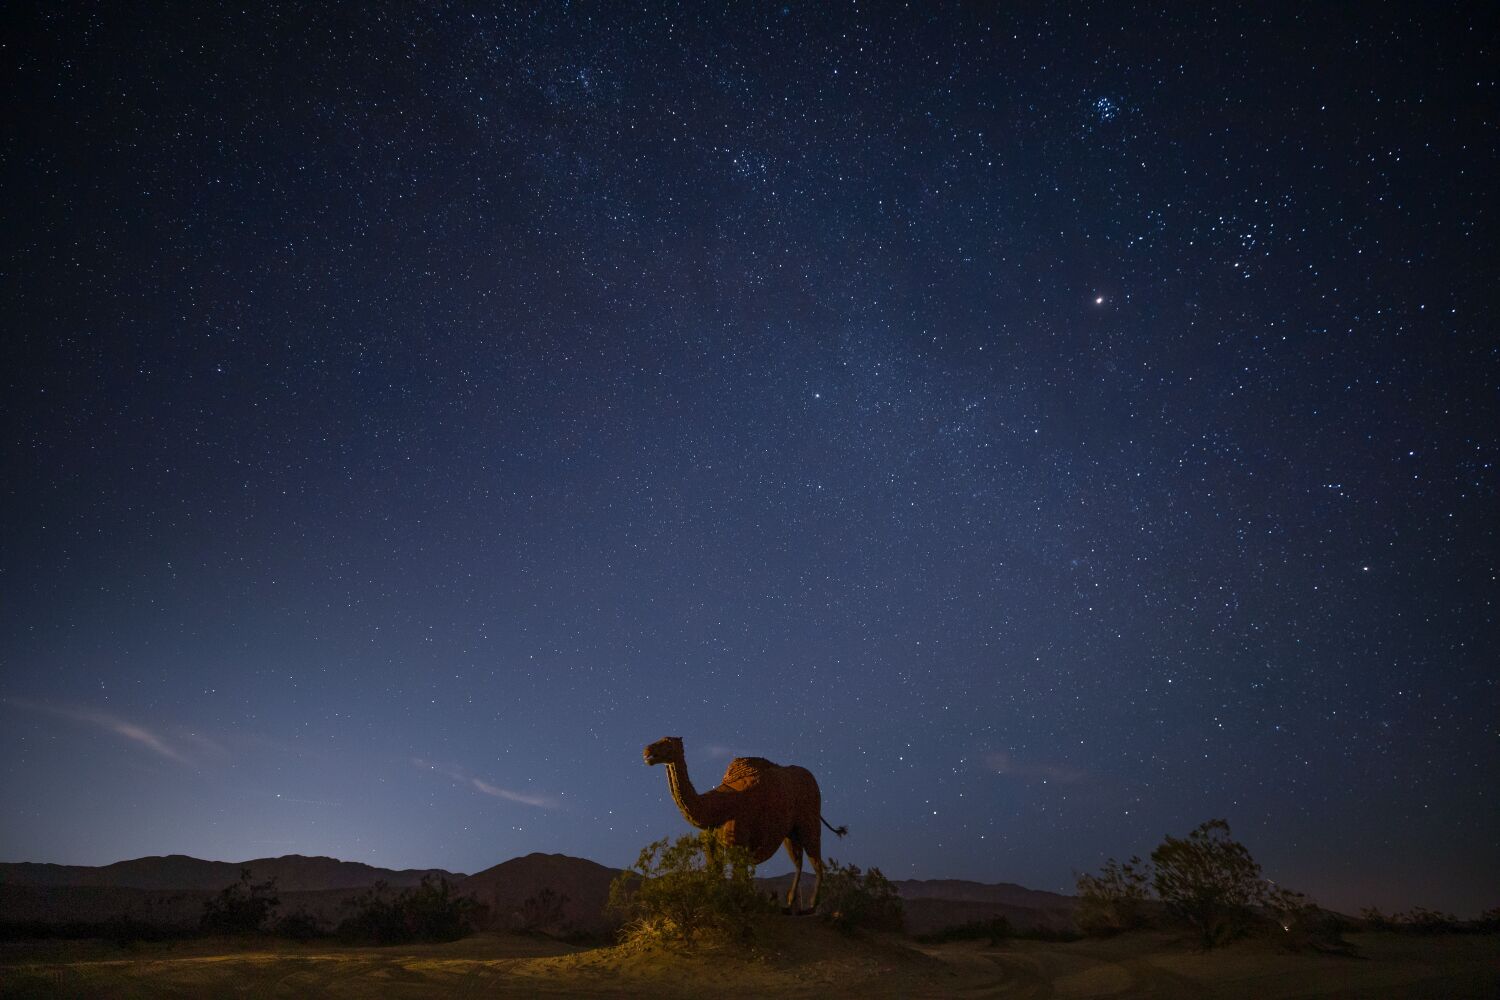 Joshua Tree too crowded? Go truly off the grid in the starry desert of Borrego Springs